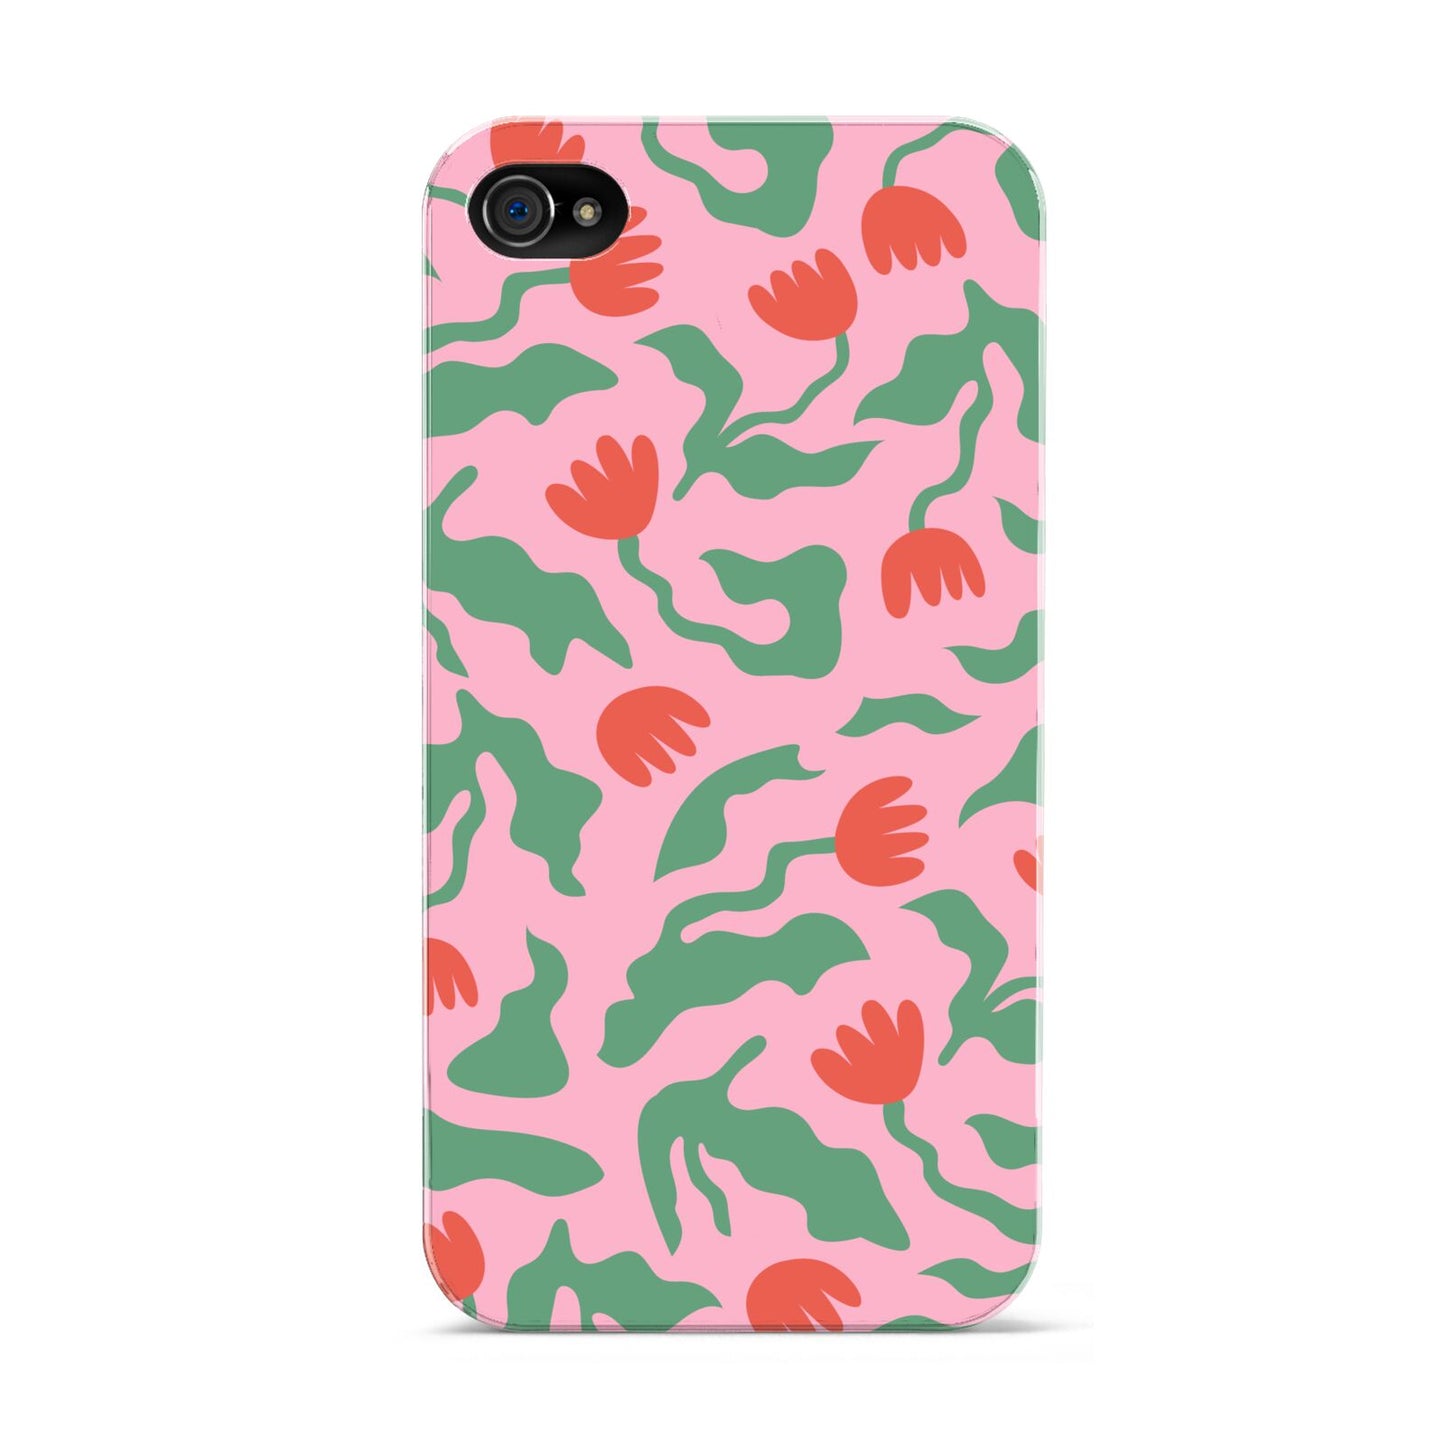 Simple Floral Apple iPhone 4s Case